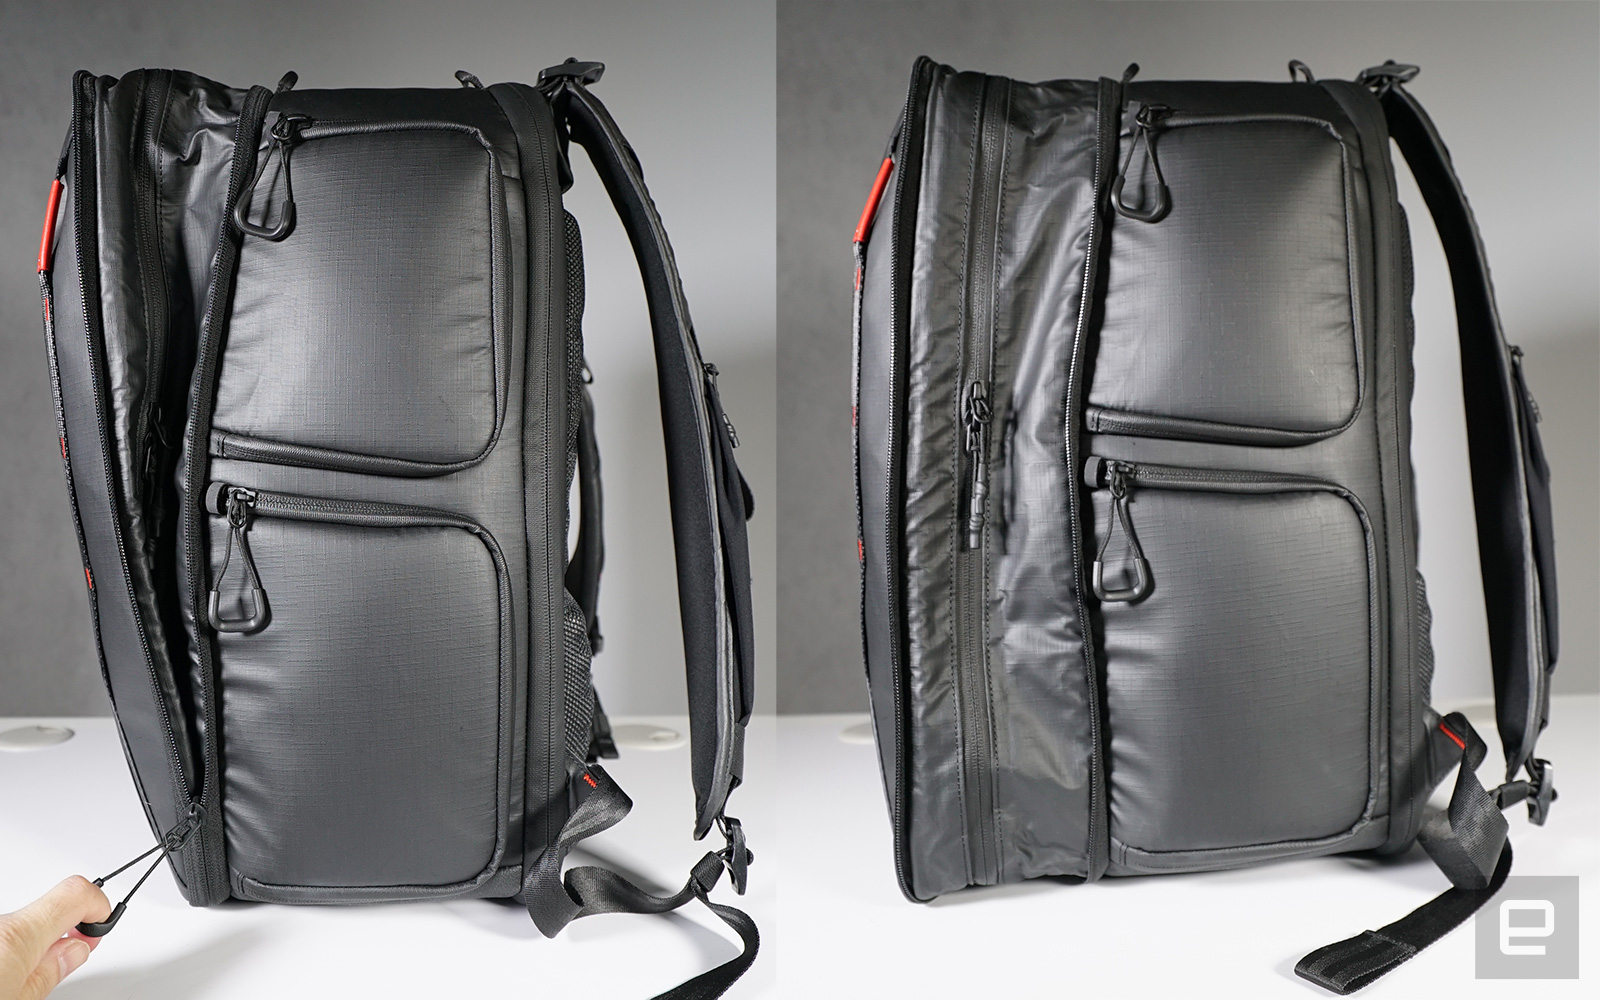 PGYTech OneMo 2 Backpack Hands-on